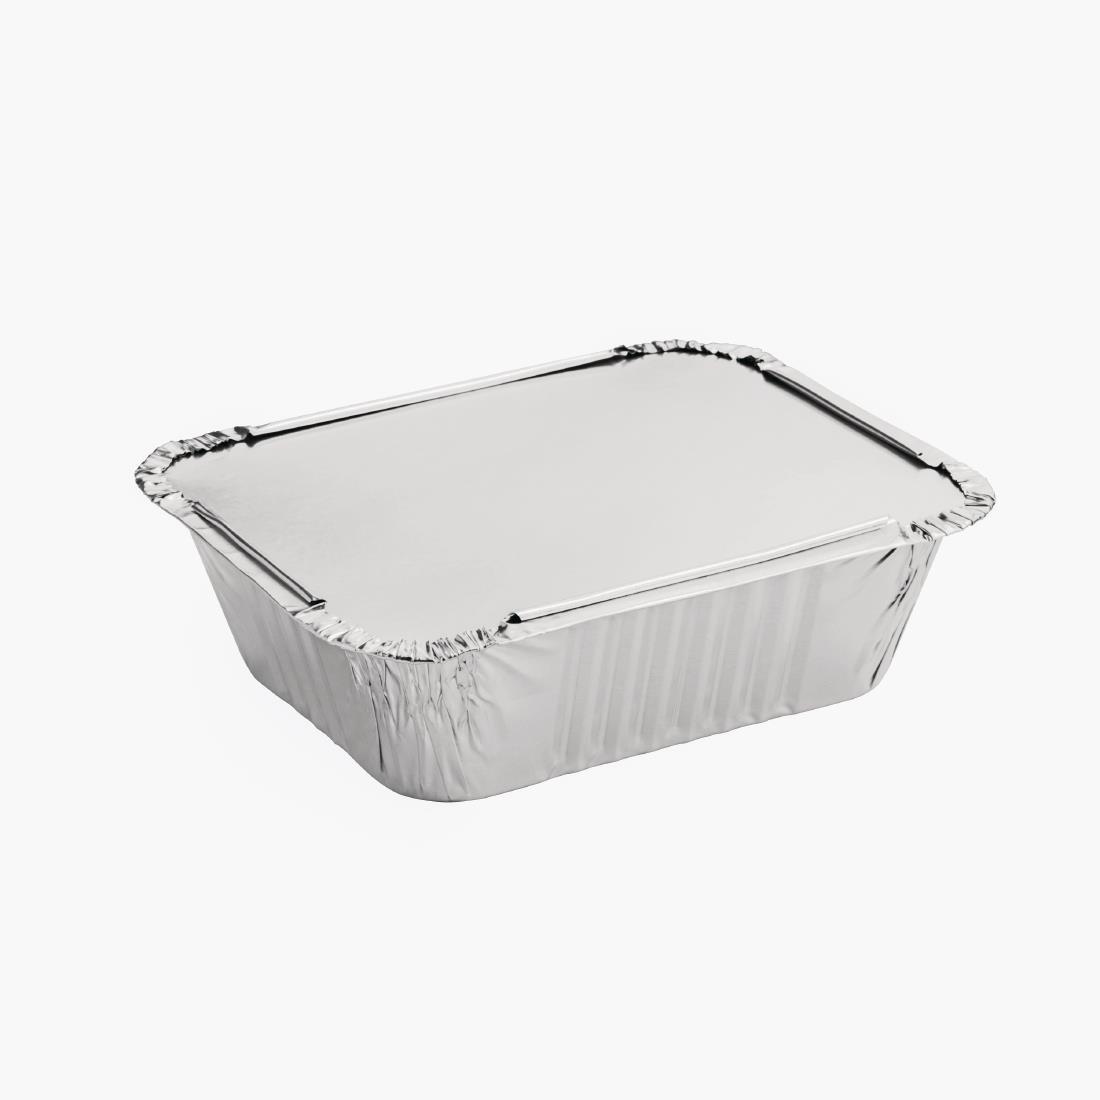 Fiesta Recyclable Waxed Lids for Medium Foil Containers (Pack of 500) - DA087  - 3